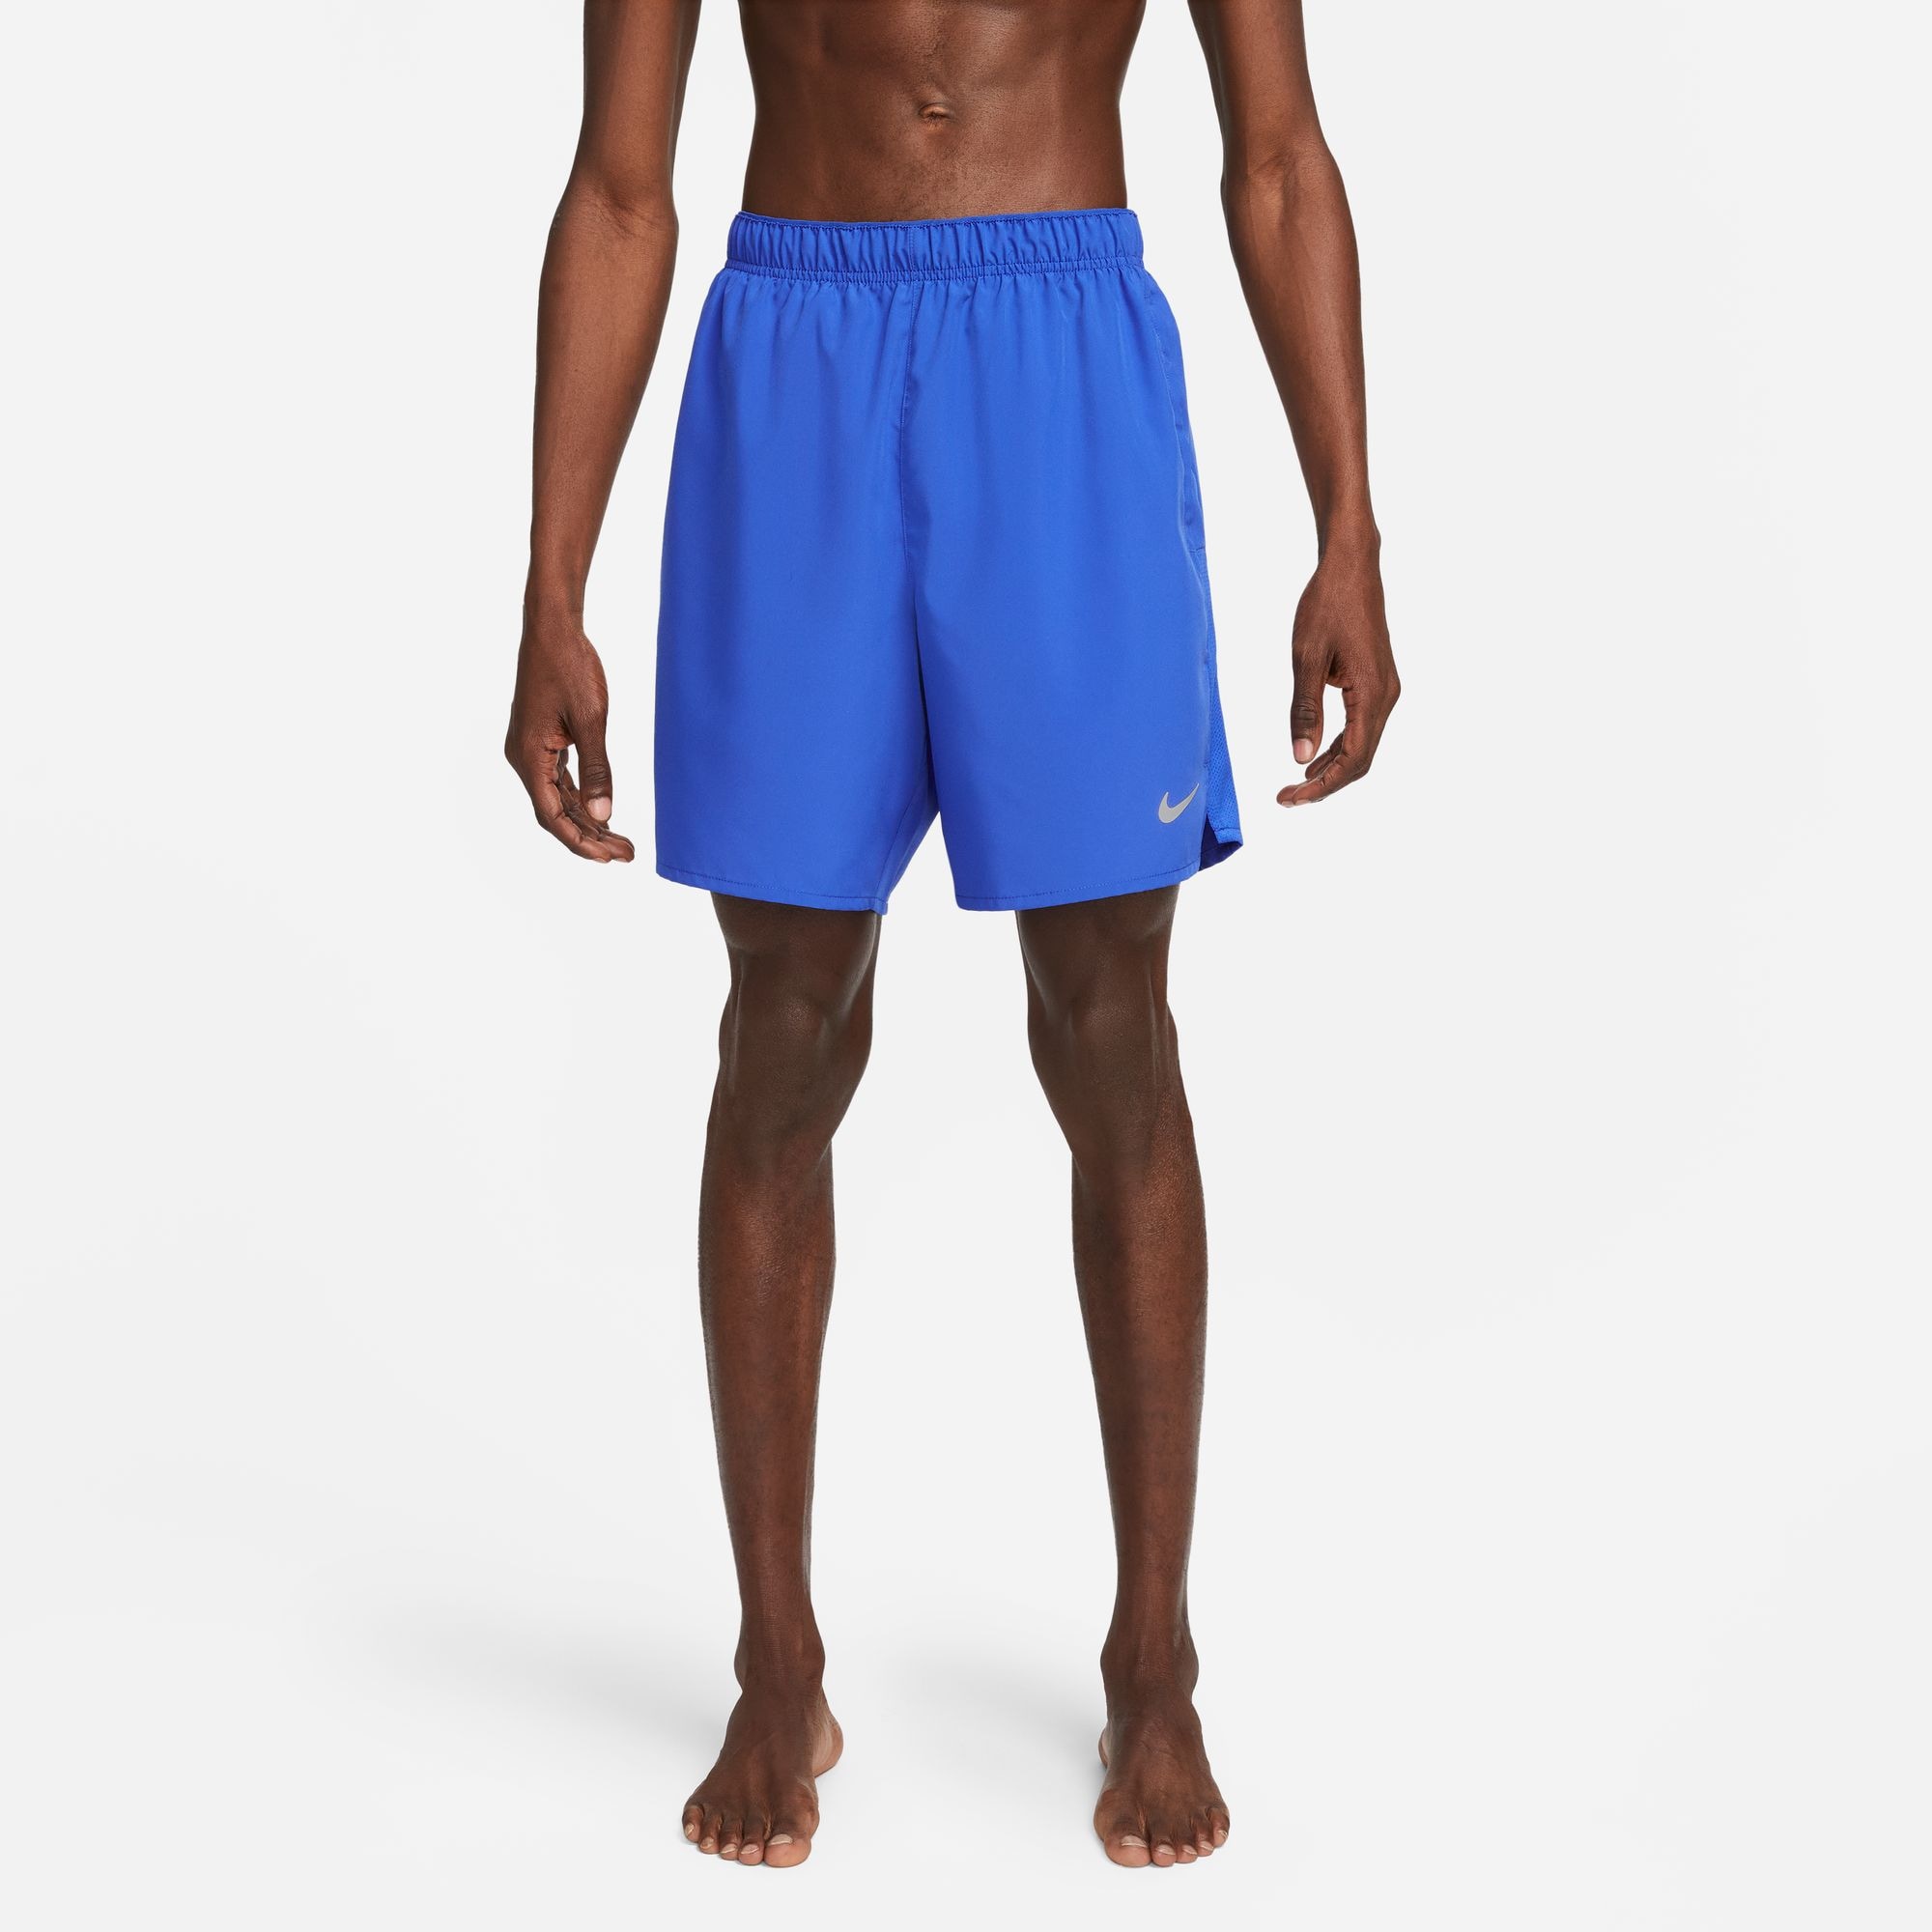 Nike Laufshorts "DRI-FIT CHALLENGER MENS UNLINED RUNNING SHORTS"